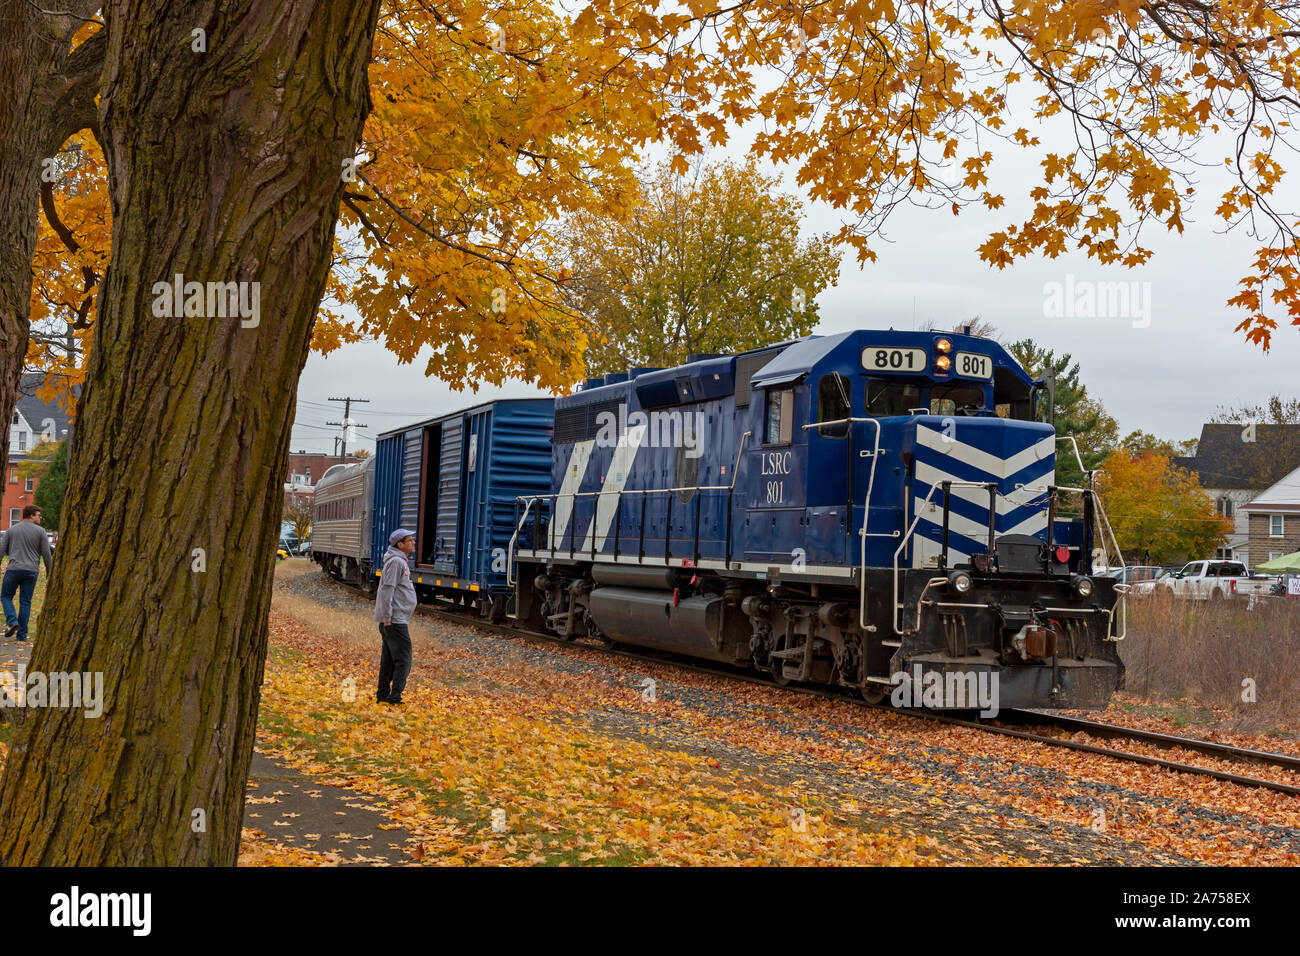 Holly, Michigan - A Lake State Railway train in rural Michigan in the autumn. The railway operates 375 miles of track in Michigan's lower peninsula. Stock Photo